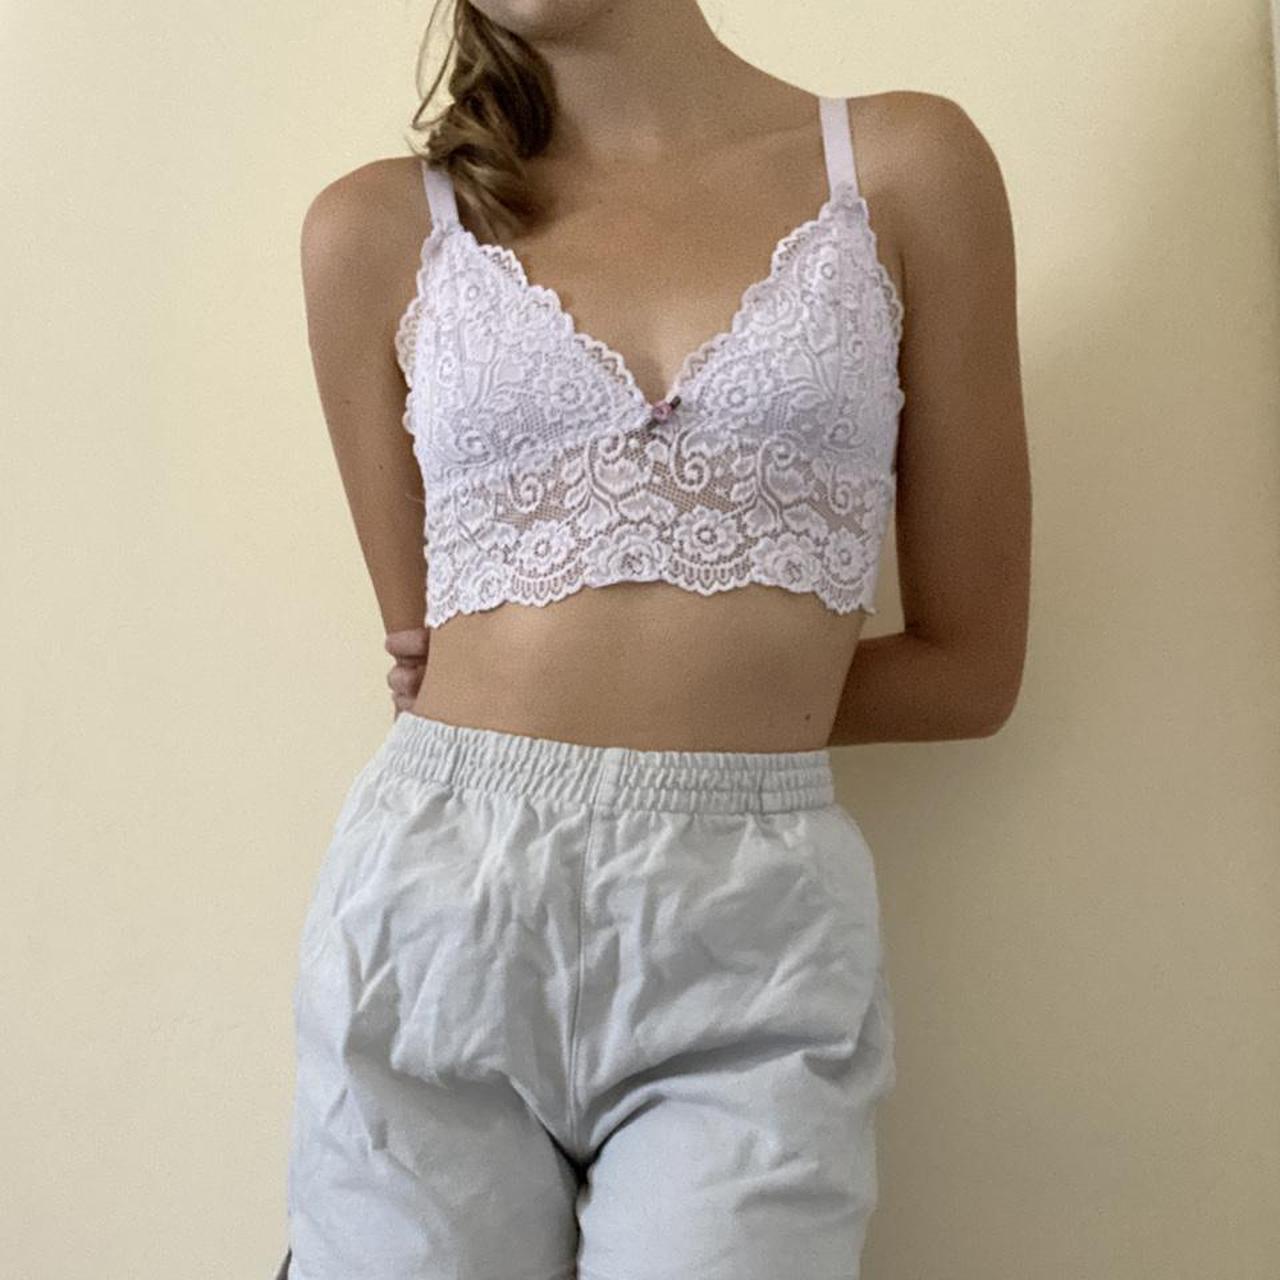 adorable urban outfitters lilac bralette! i just - Depop